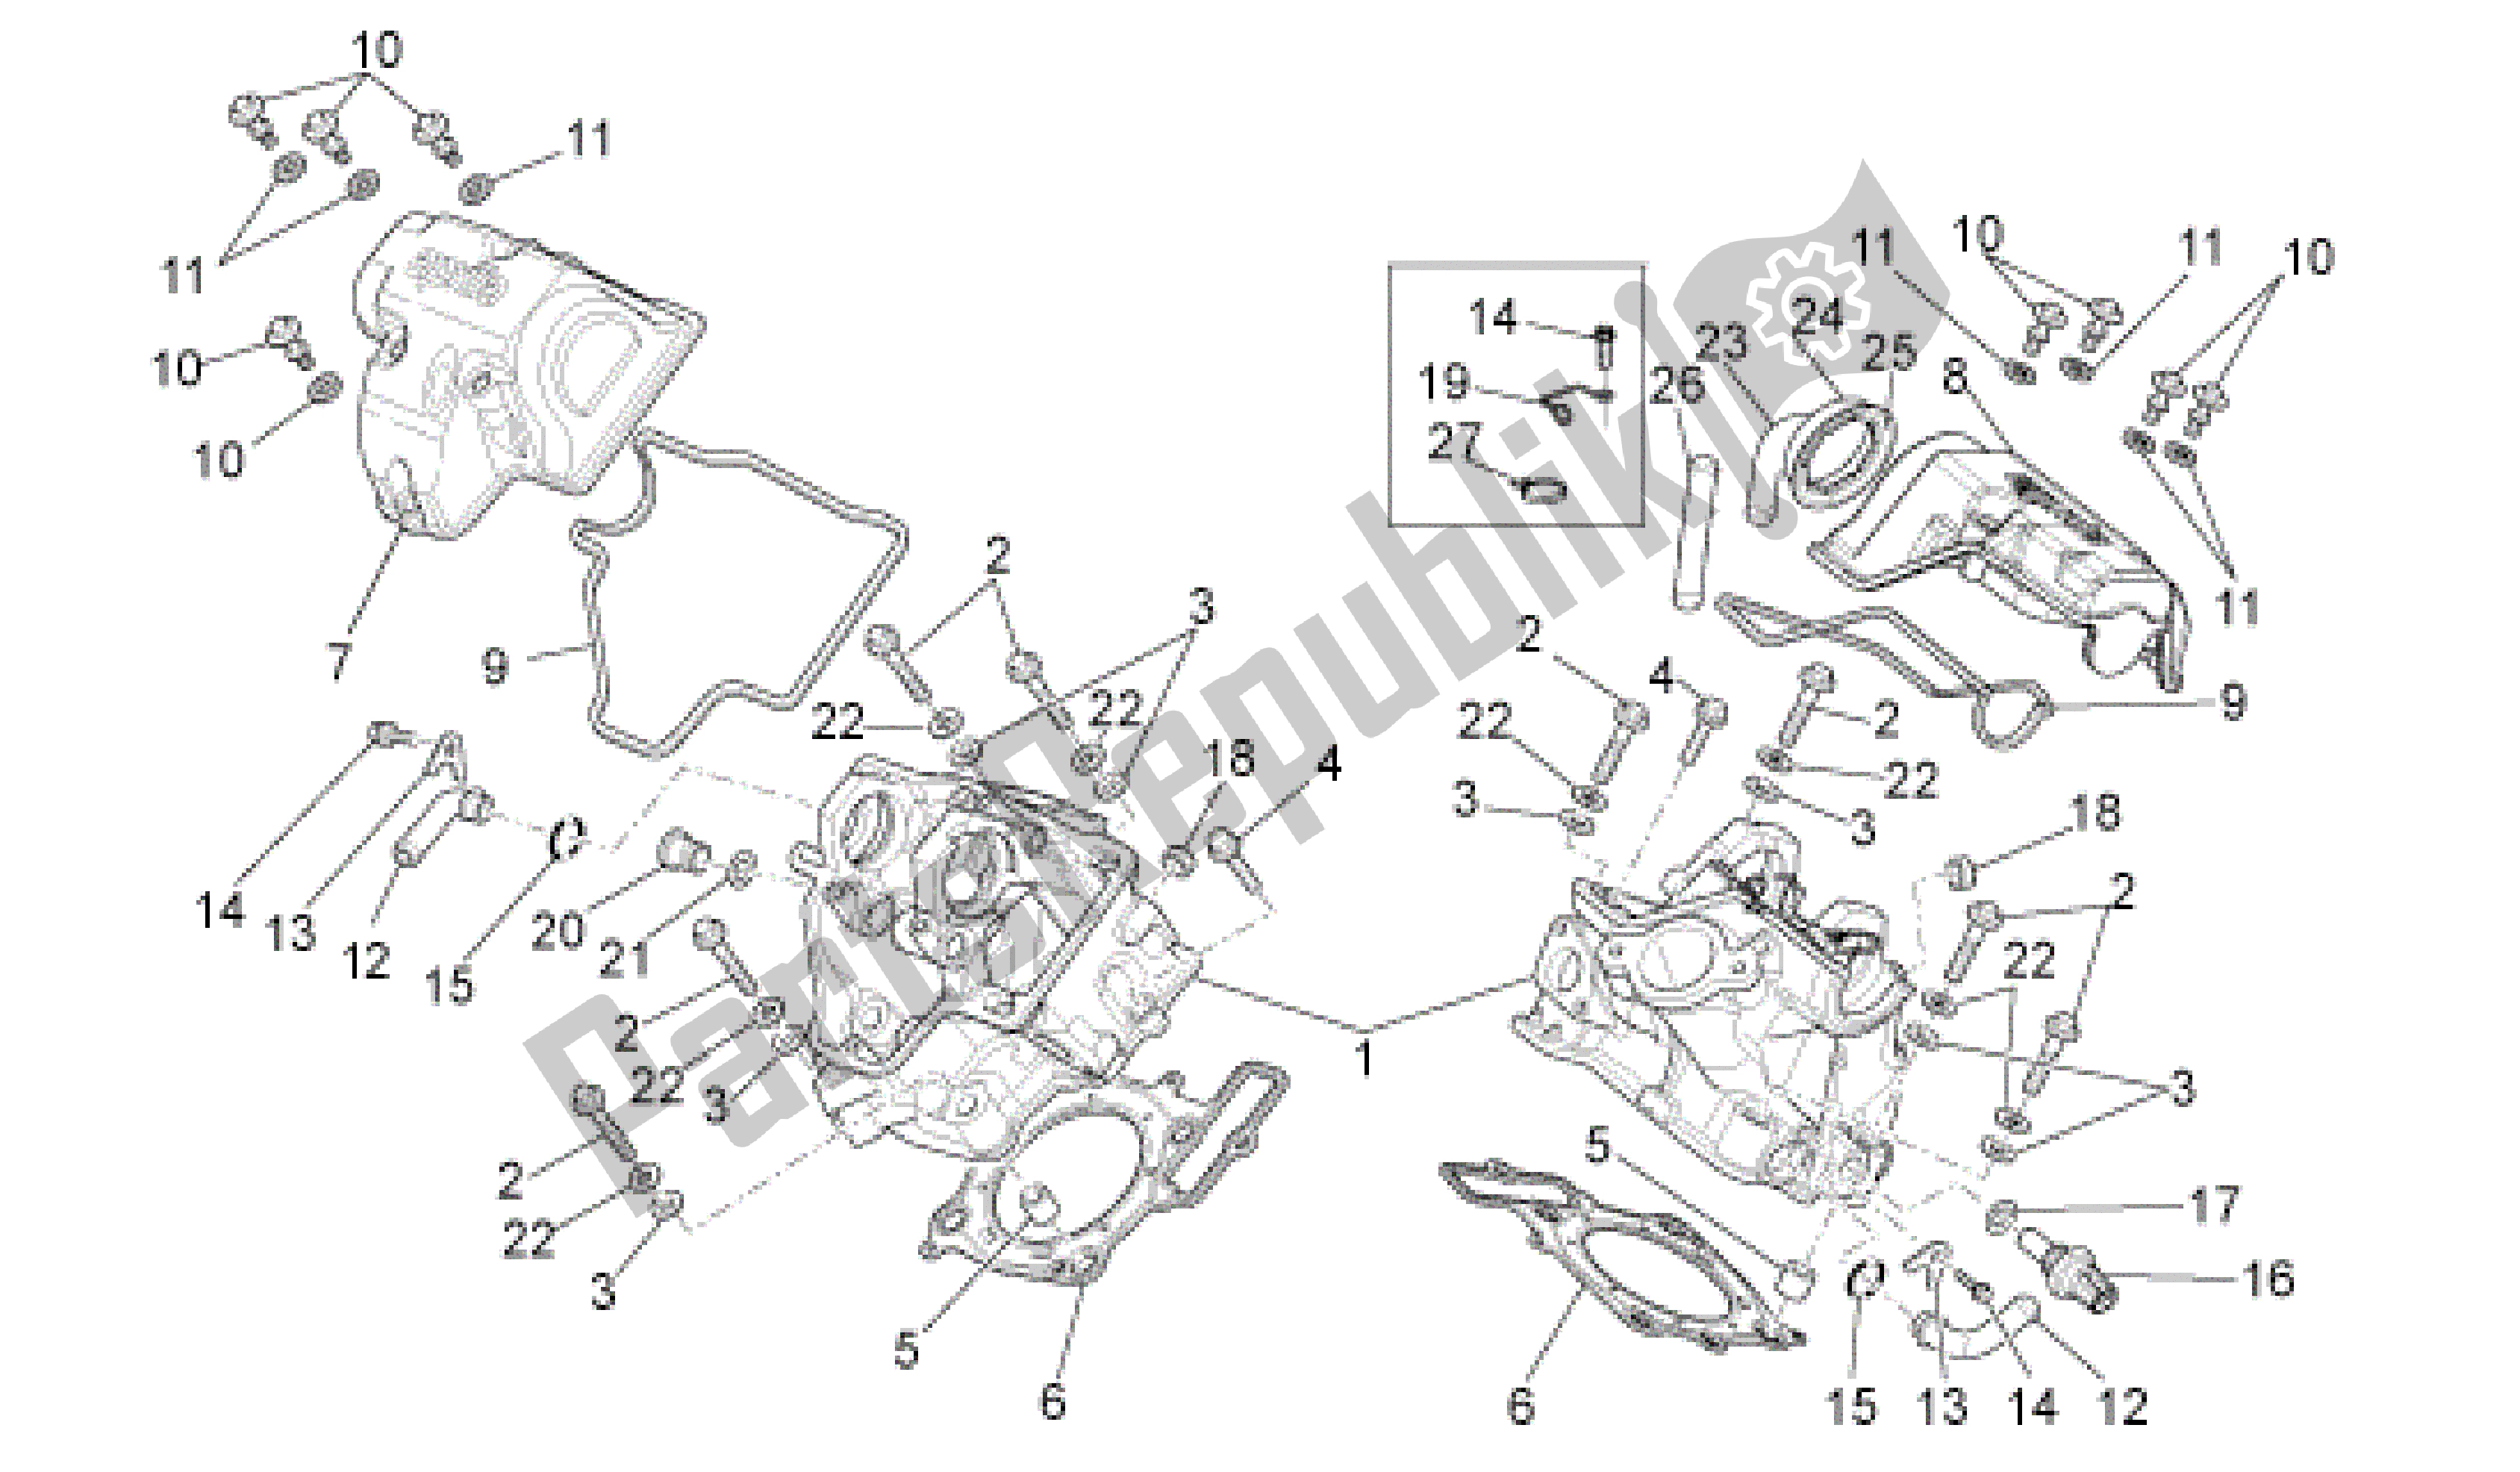 All parts for the Cylinder Head of the Aprilia RXV 550 2009 - 2011